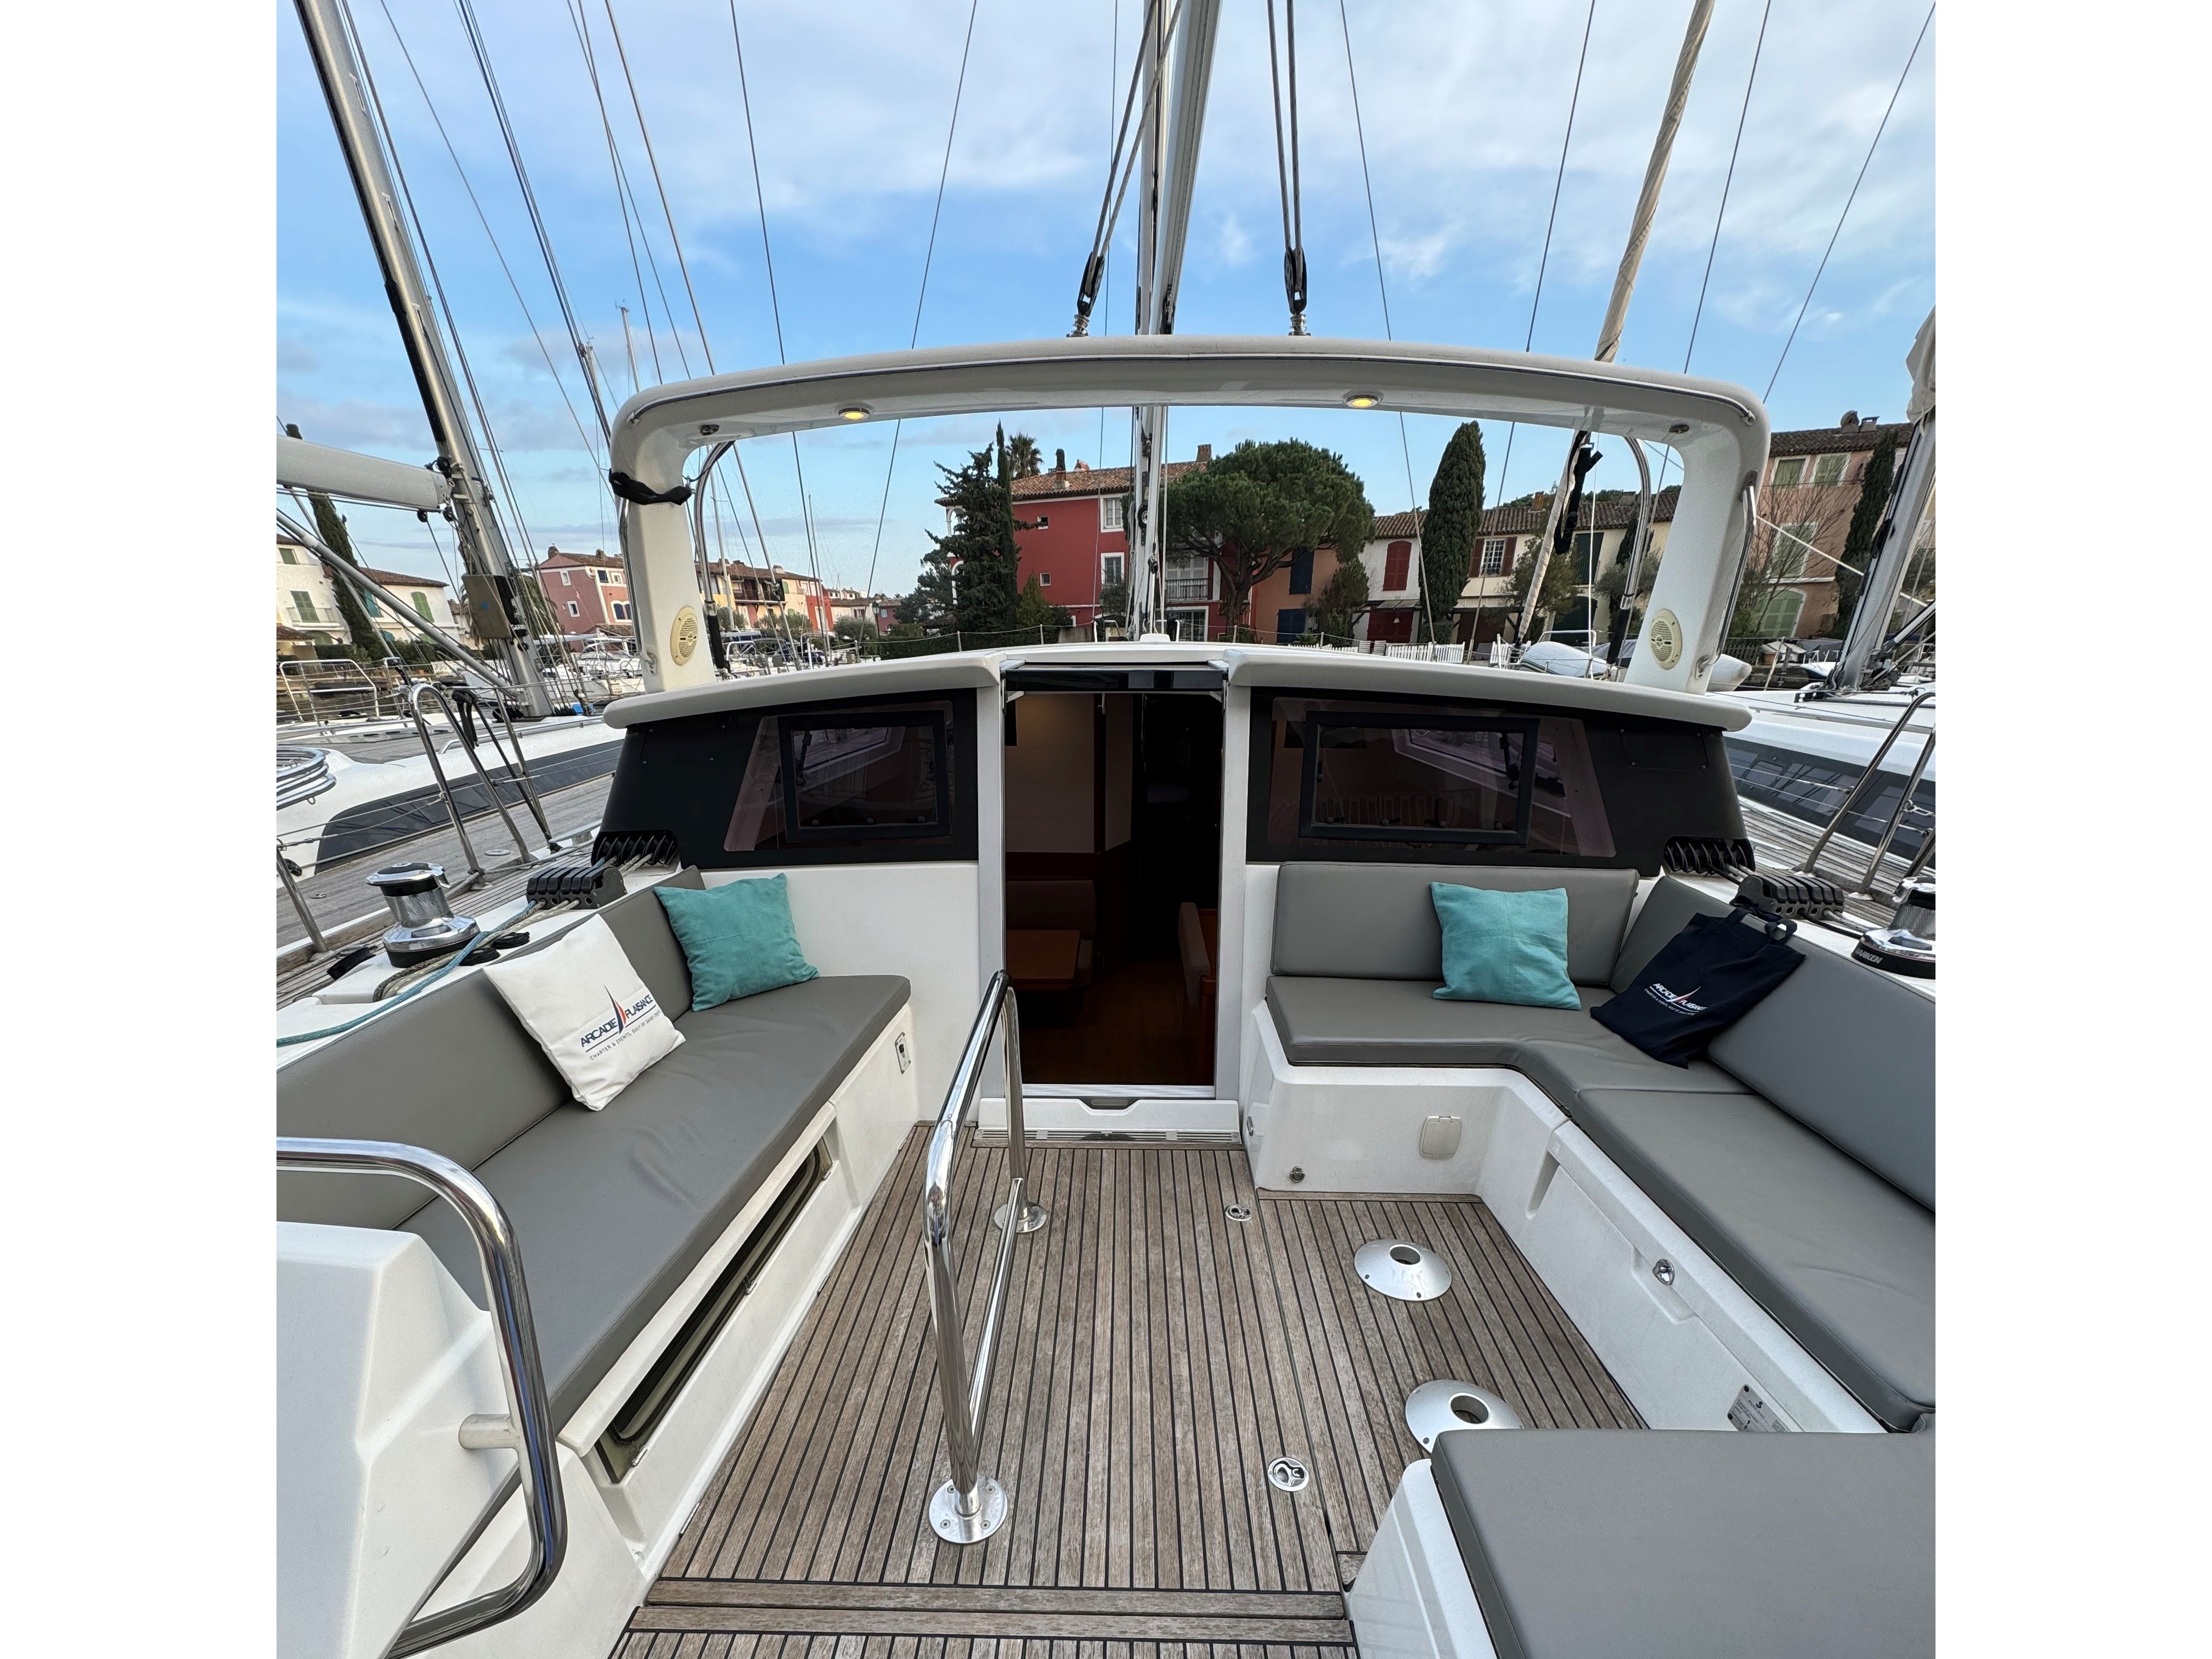 Sense 50 - Yacht Charter French Riviera & Boat hire in France French Riviera Grimaud Port Grimaud 1